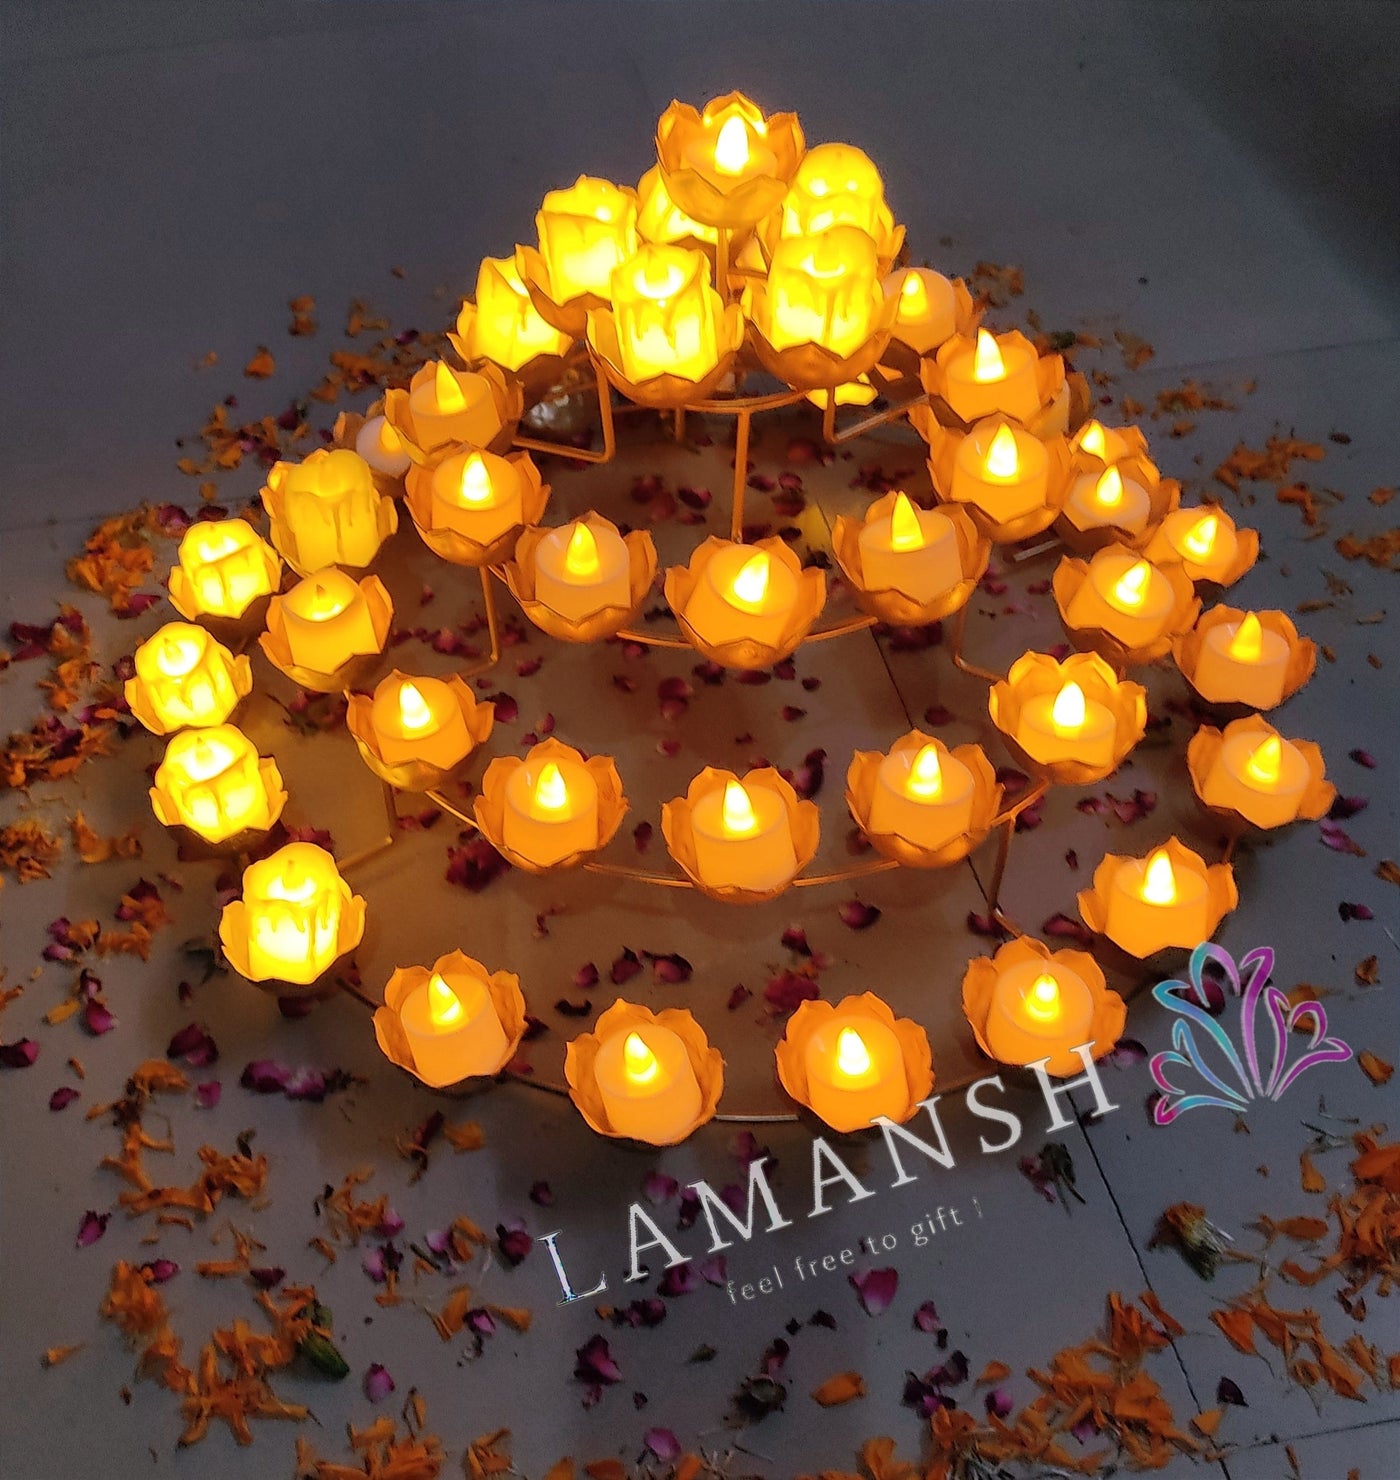 Lamansh Candle Holders LAMANSH® Metal Rangoli Diya Tealight Candle 🪔 holder stand / Mountain Diya Stands /Metal Handicraft for corporate & festival gifting 🎁 / Home decor product for Diwali ( candles not included )